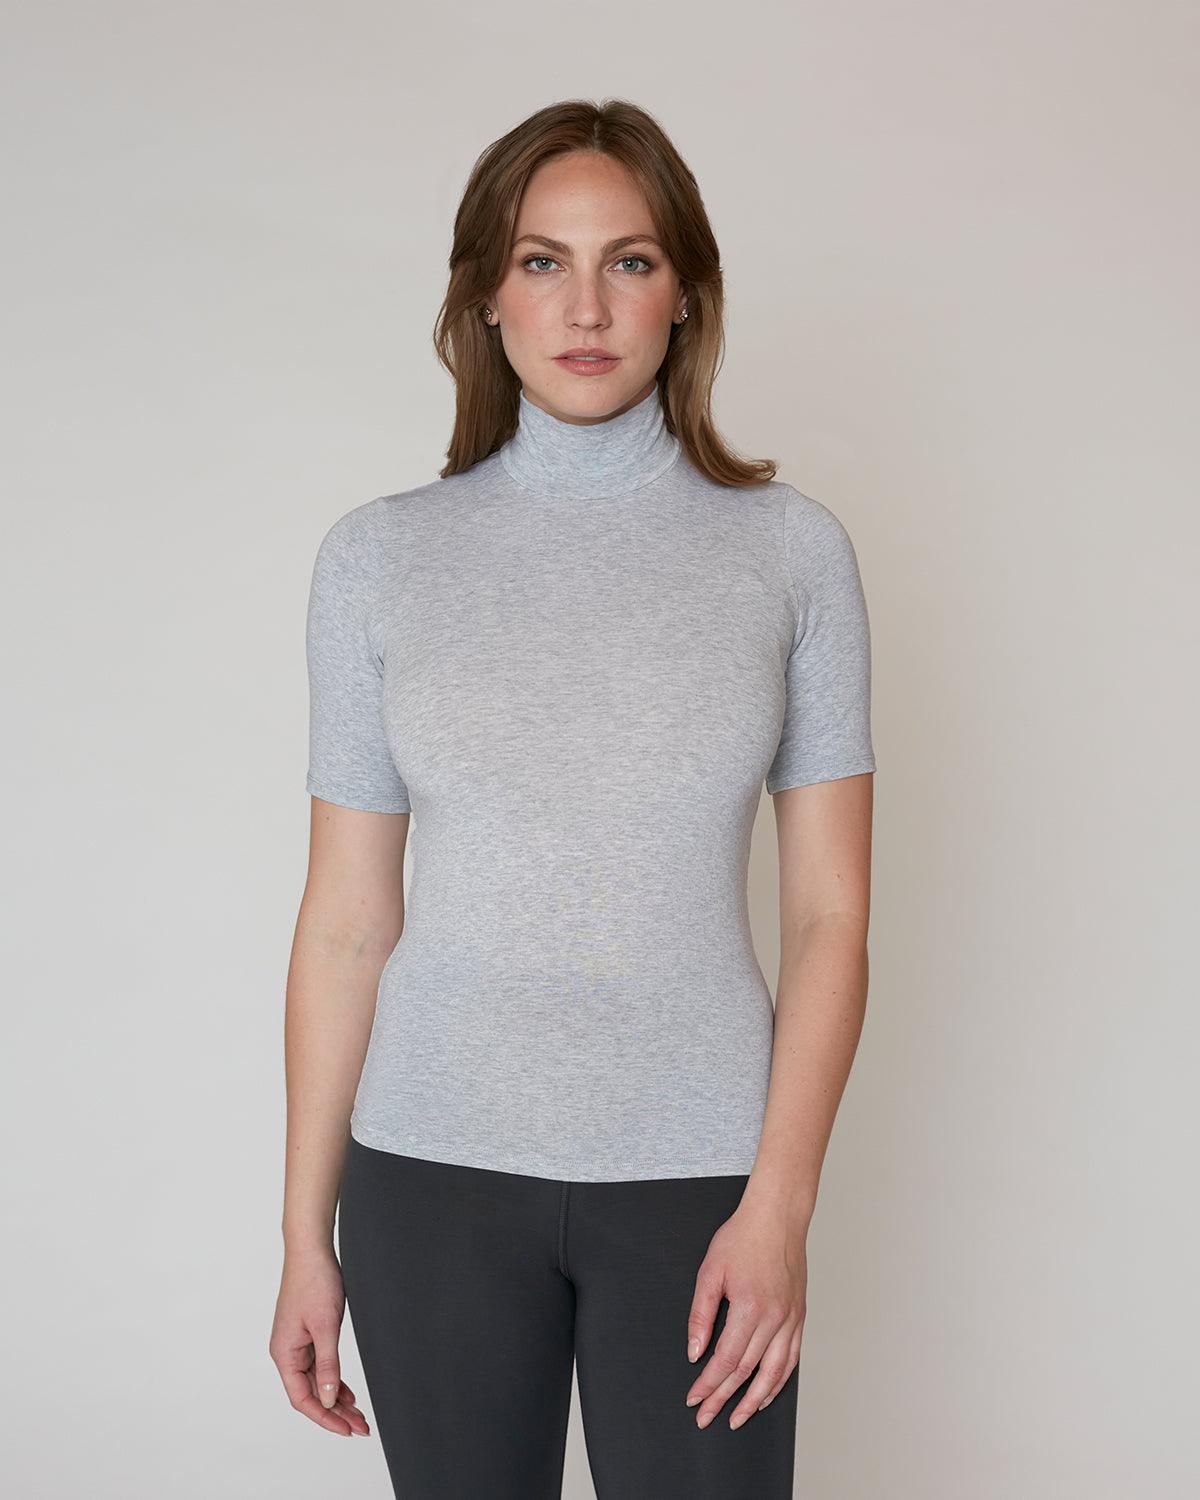 "#color_HEATHER GREY|Siobhan is 5'8.5" and wears a size S